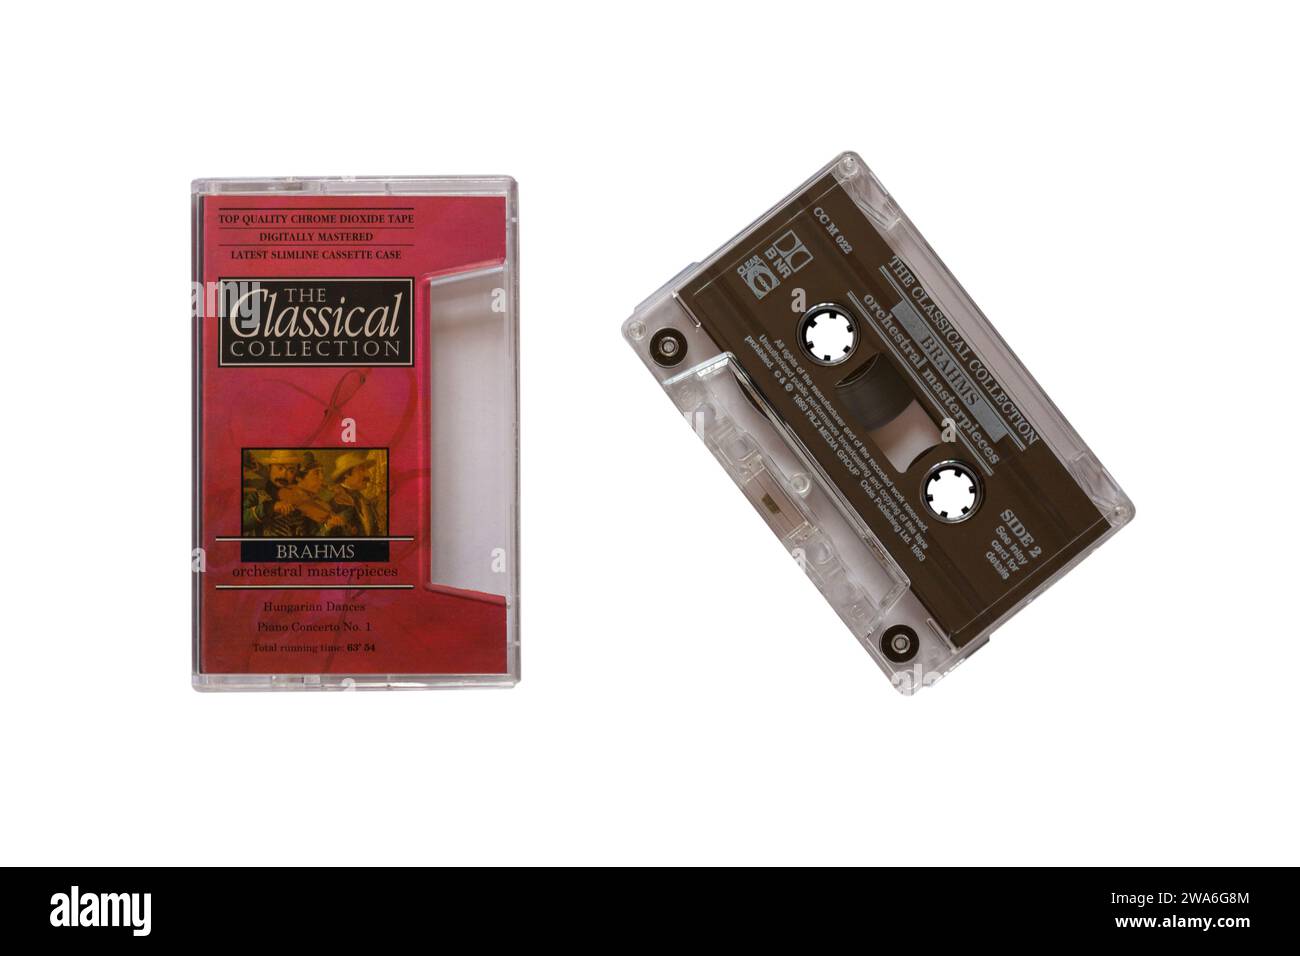 The Classical Collection Brahms Orchestral Masterpieces cassette tape removed from case isolated on white background - classical music Stock Photo